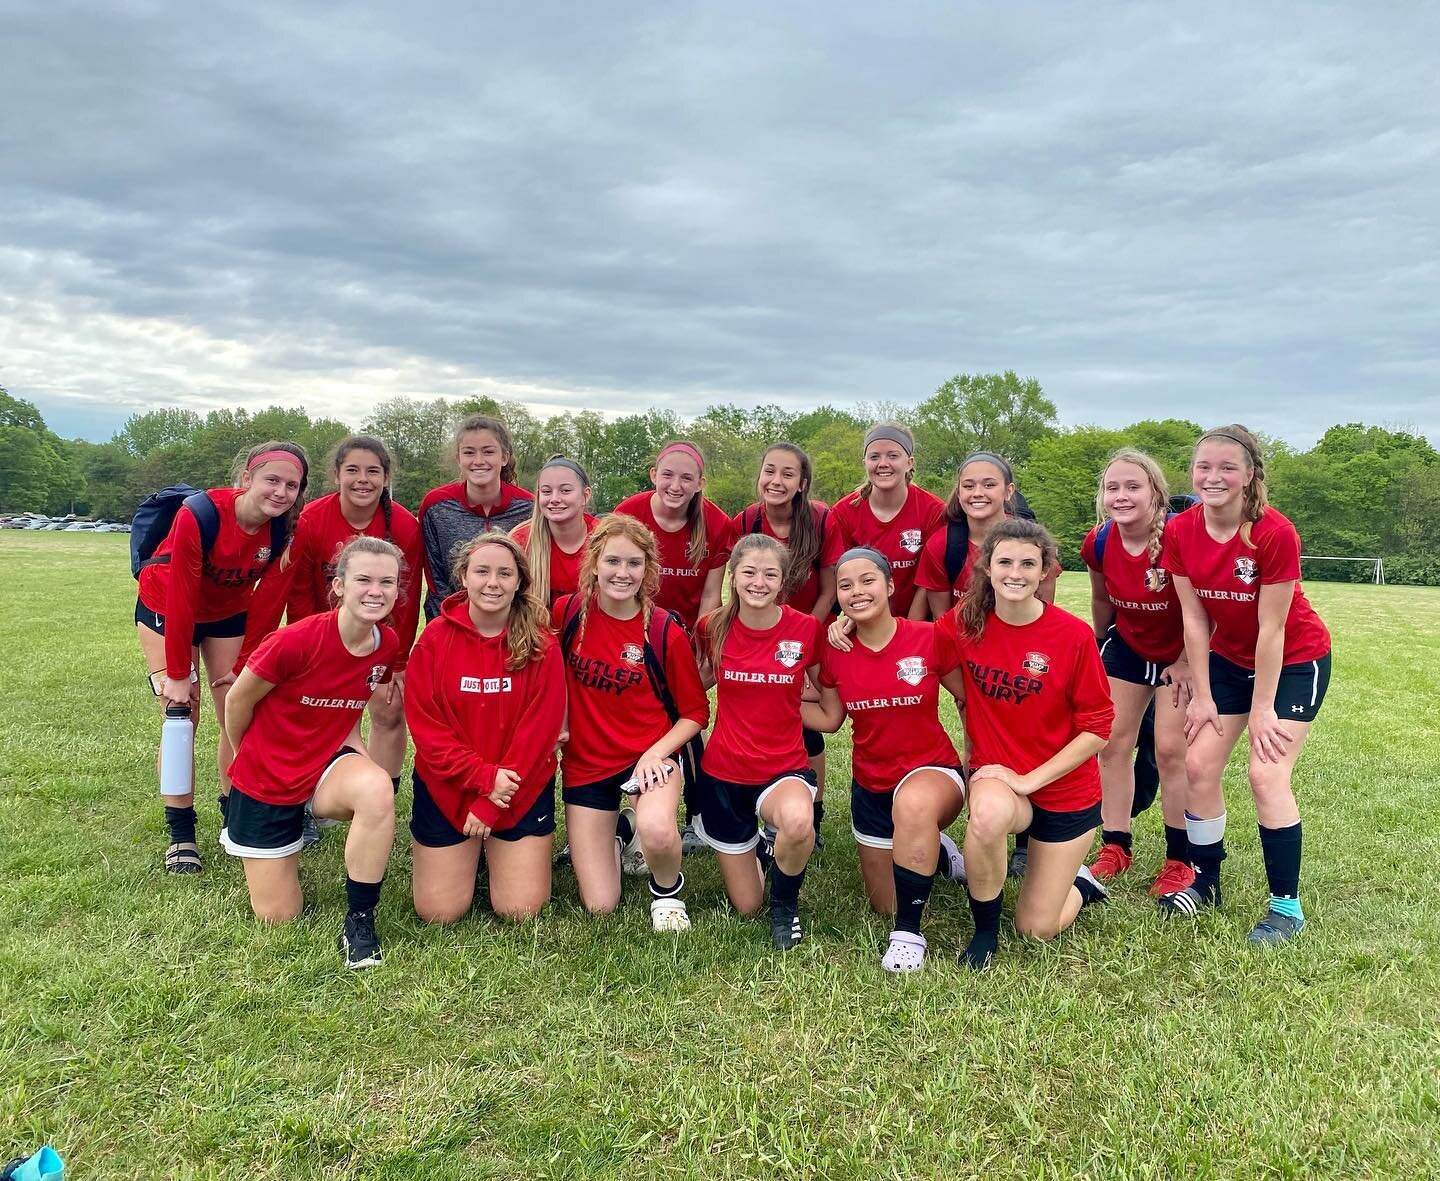 Congratulations to the U18 Women&rsquo;s team for winning their division at the Cincinnati West Soccerfest tournament this weekend with a 3-0-1 record!